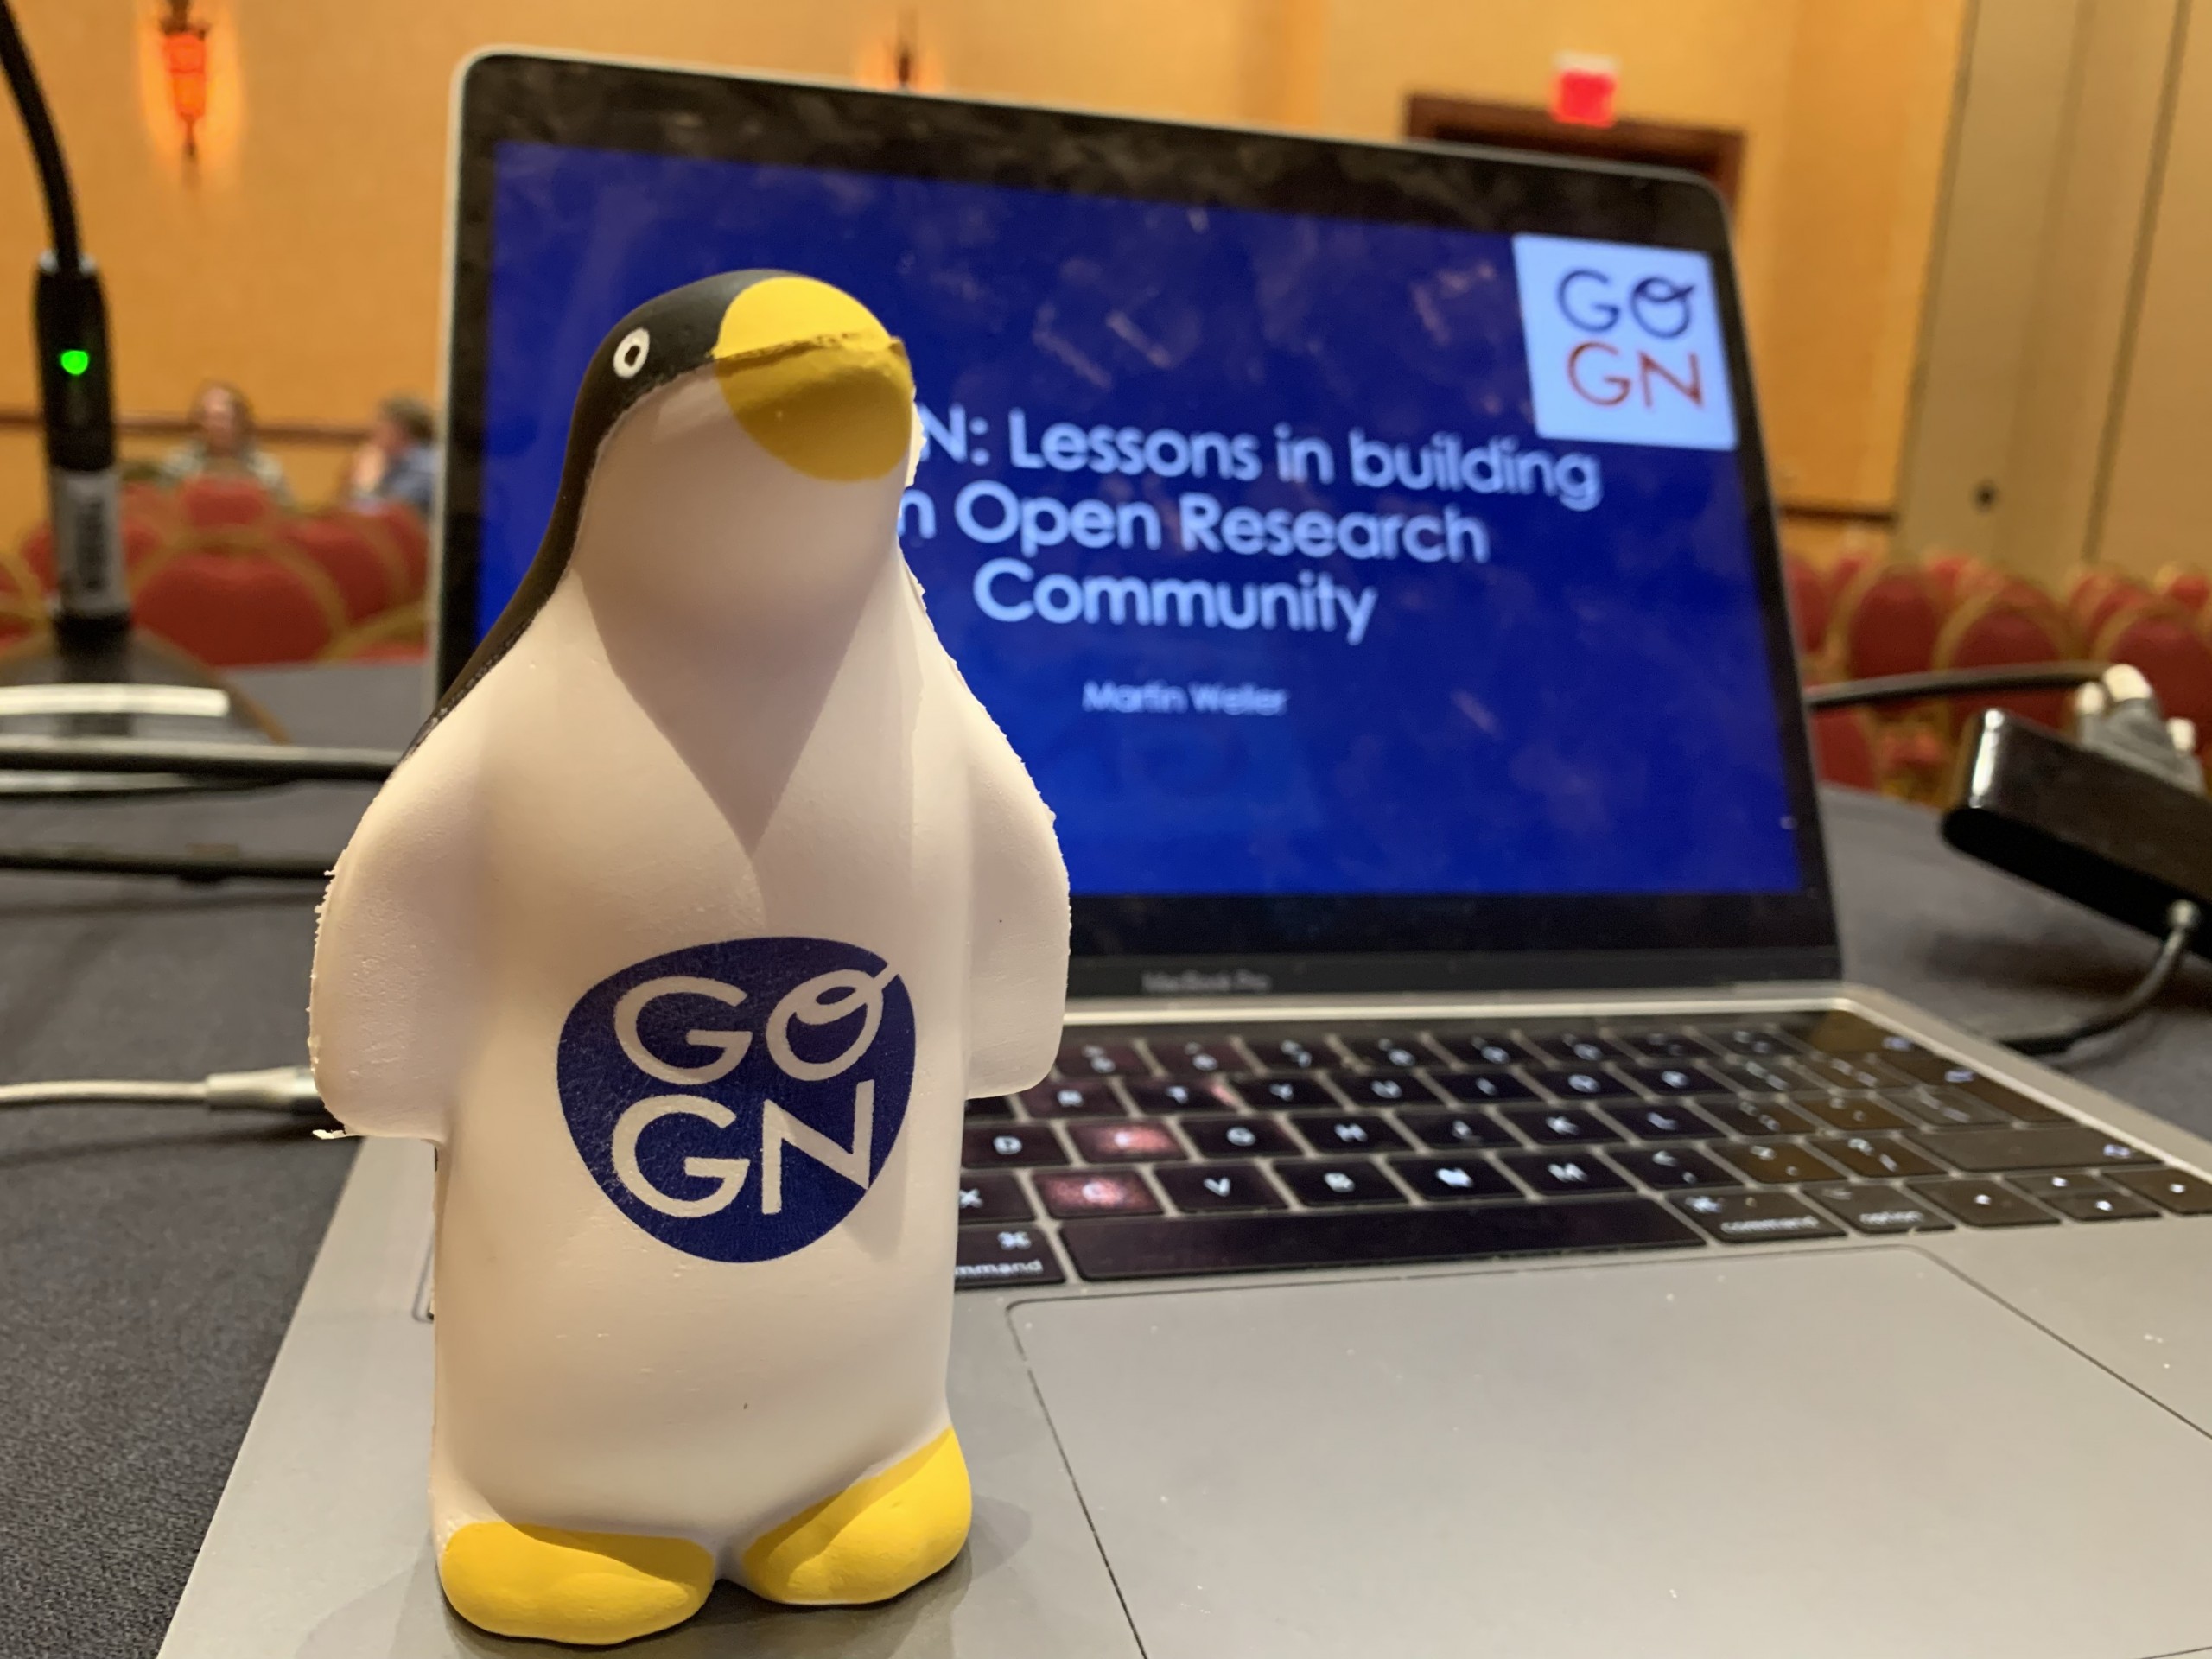 GO-GN penguin in front of a laptop